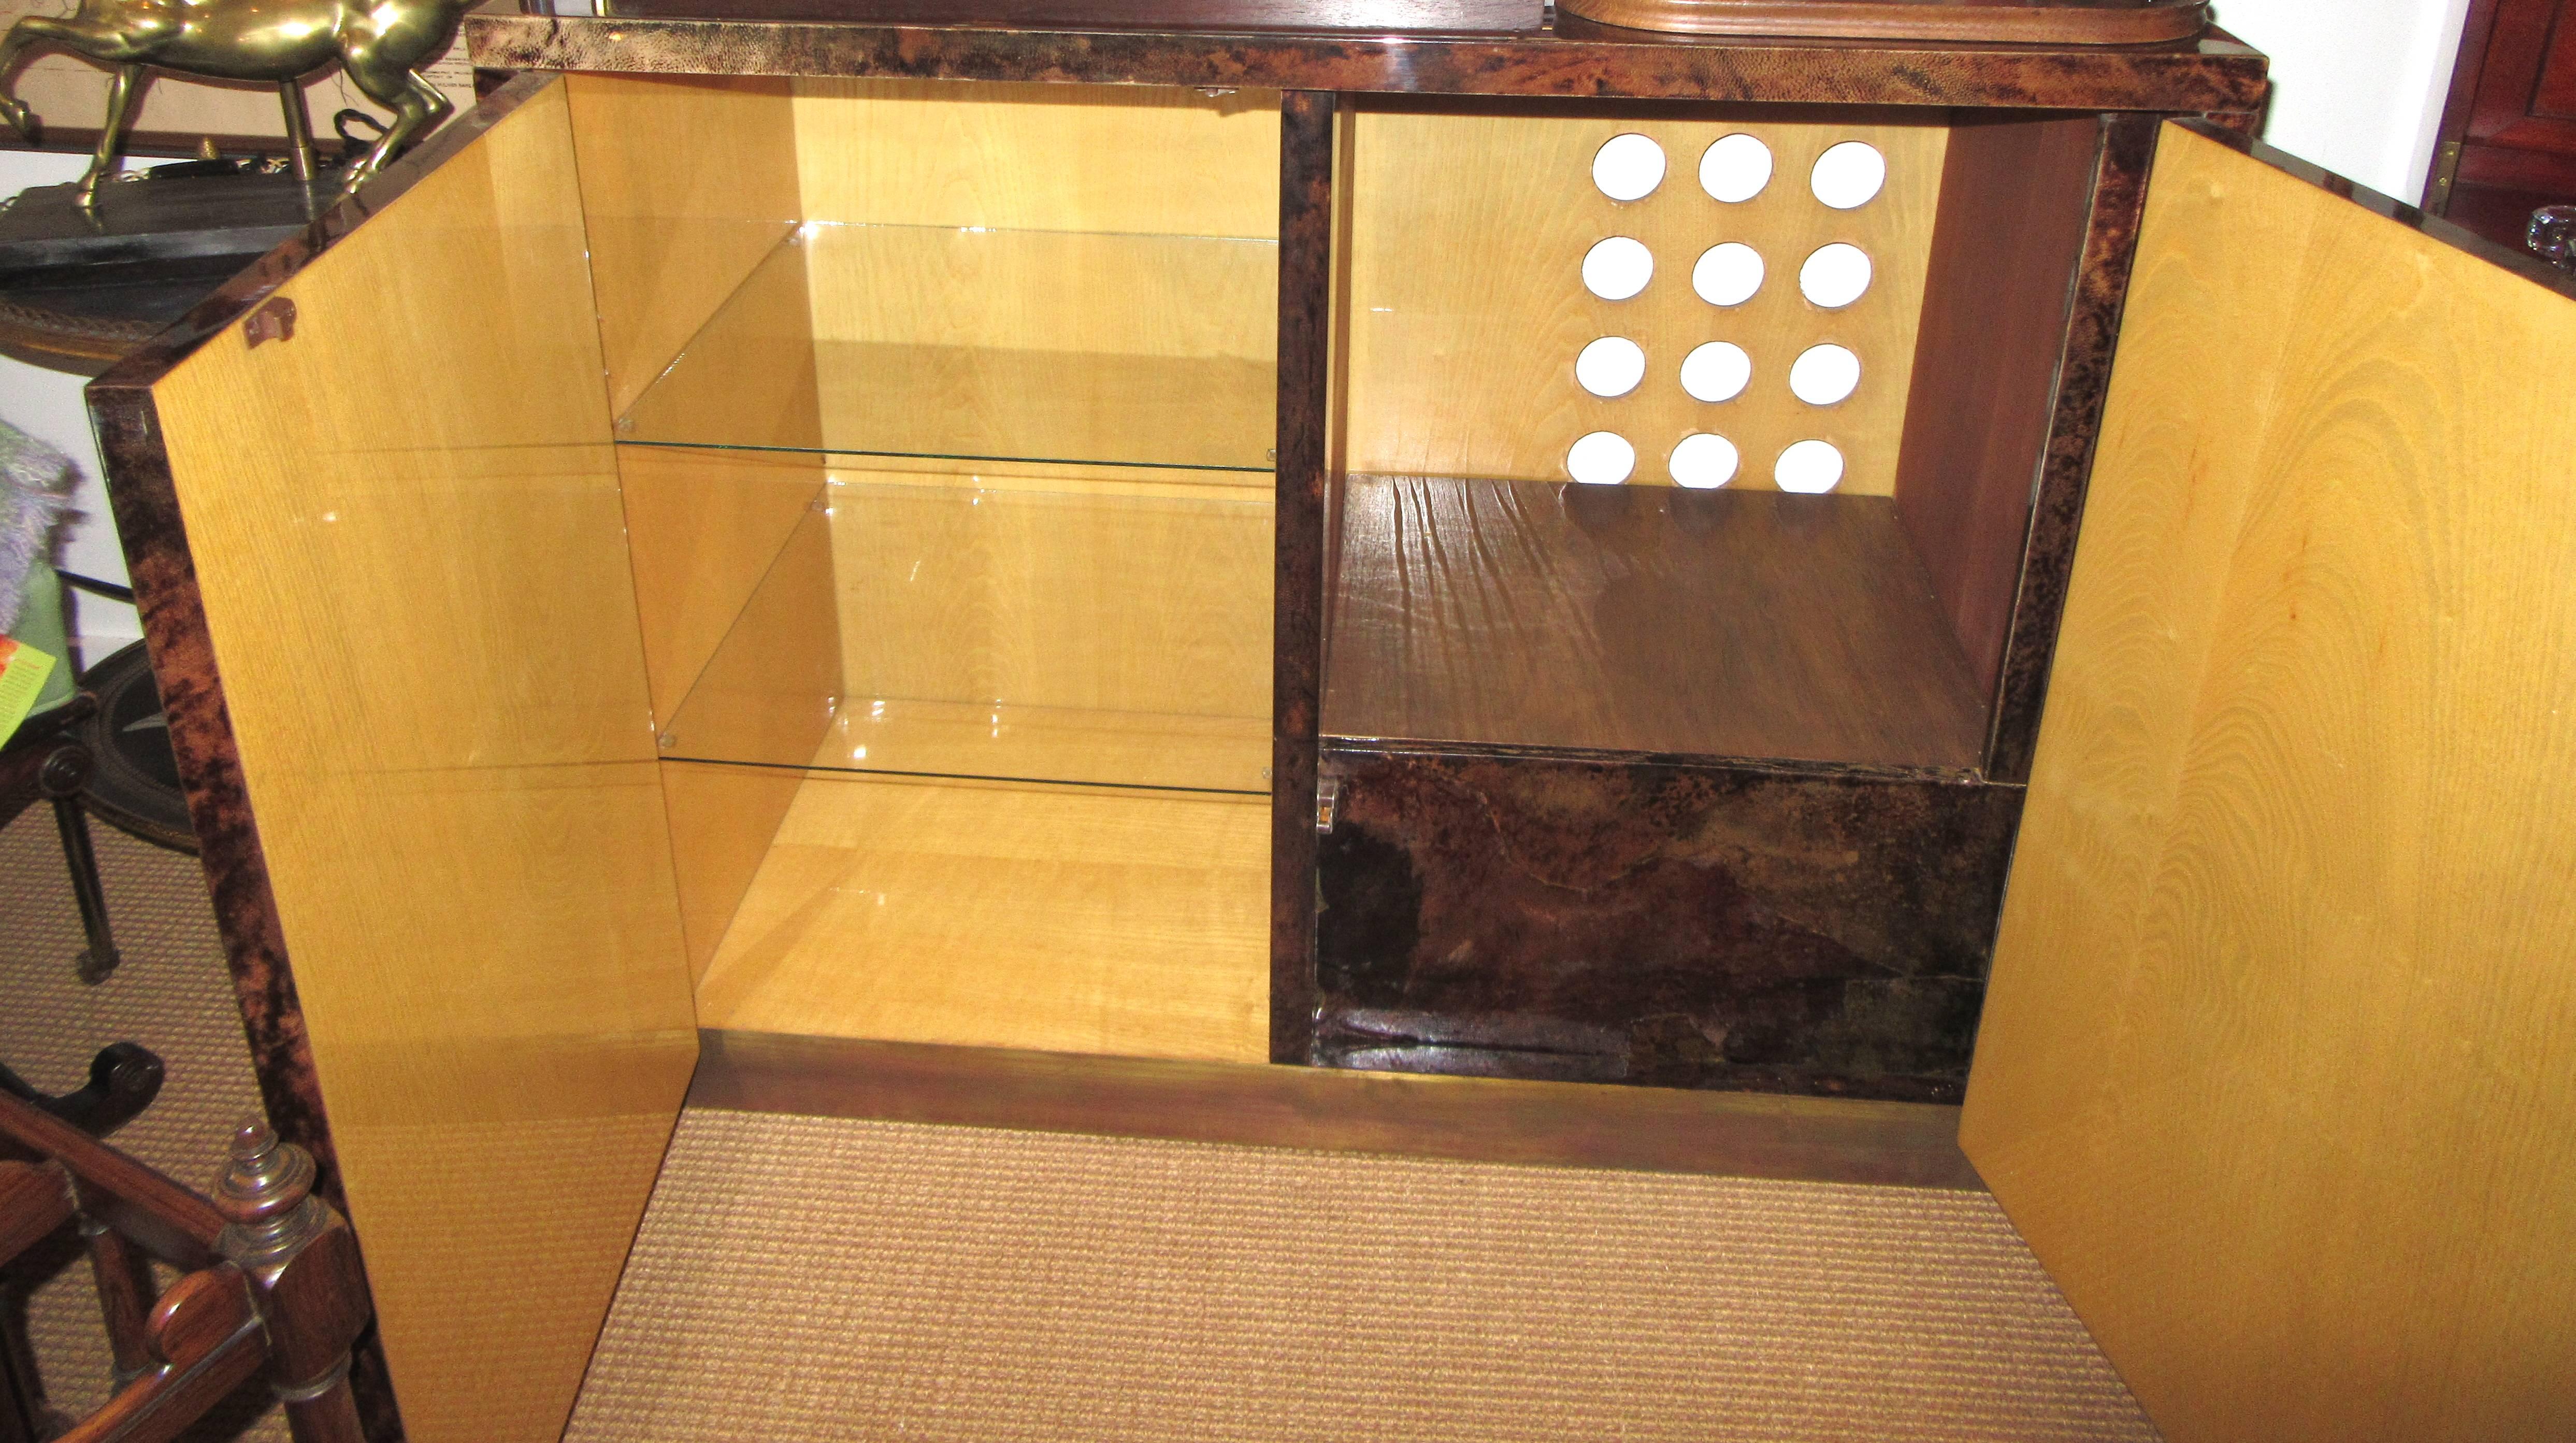 A brown high shine lacquered parchment two sided cabinet. The push to open doors reveal double glass shelving on the left, and on the right space for a dry bar or media equipment. The original cabinet held a vintage 